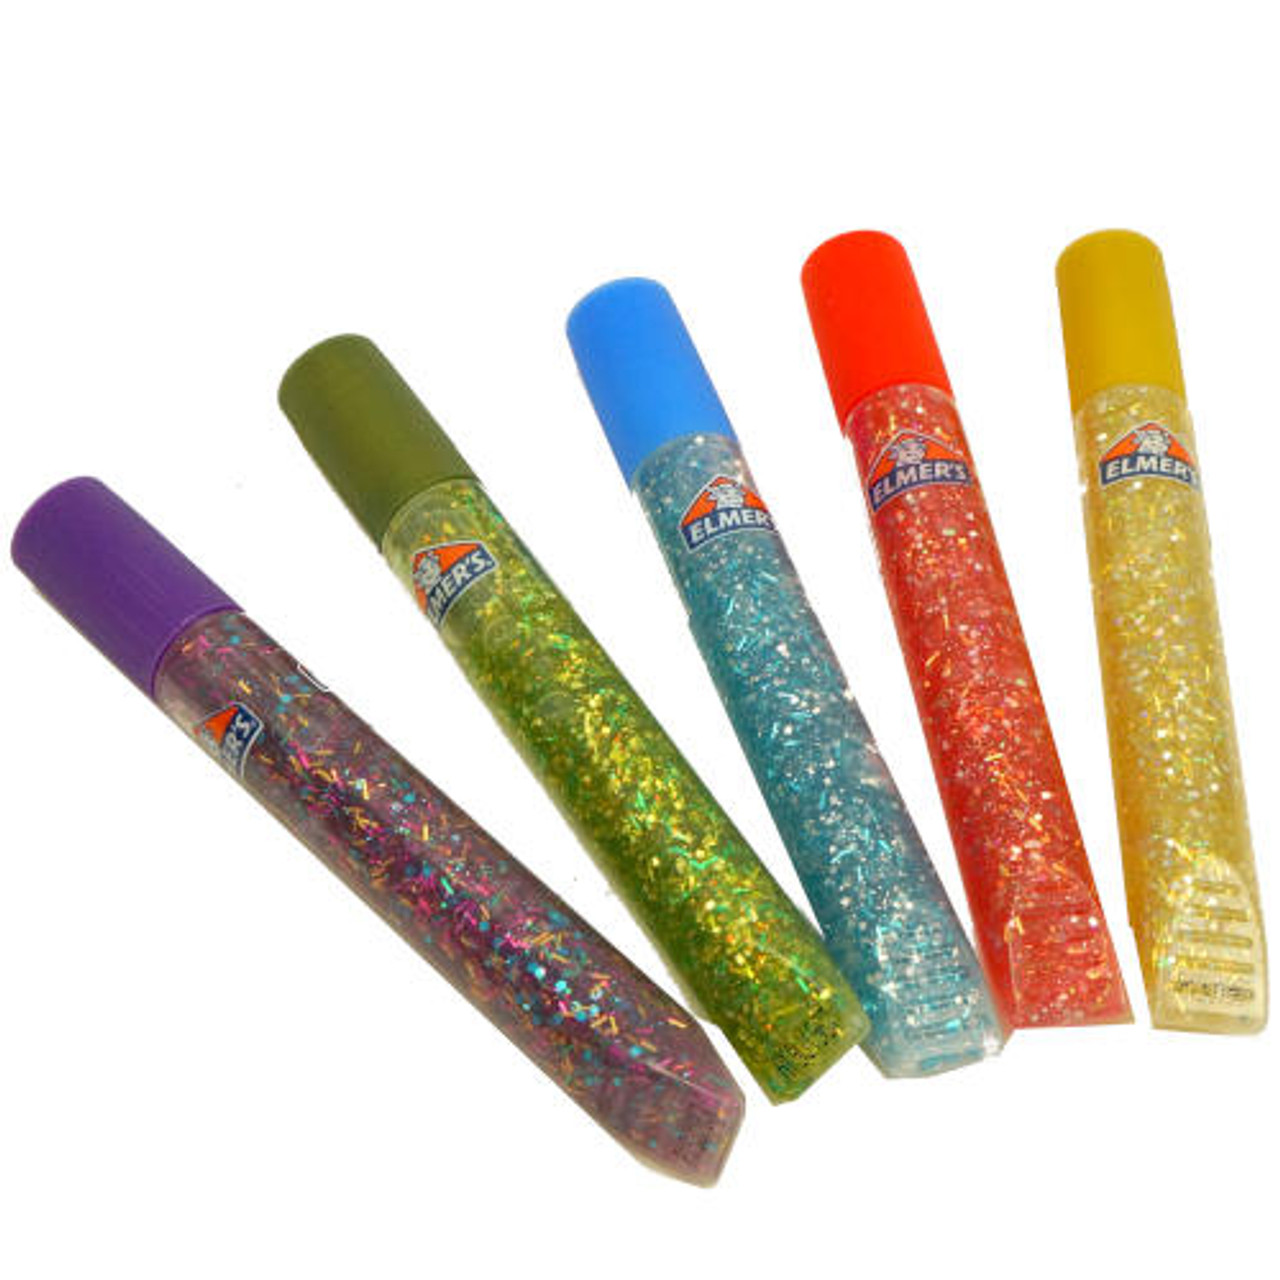 Elmers Glow In The Dark Glitter Glue Blue & Yellow to Red Great